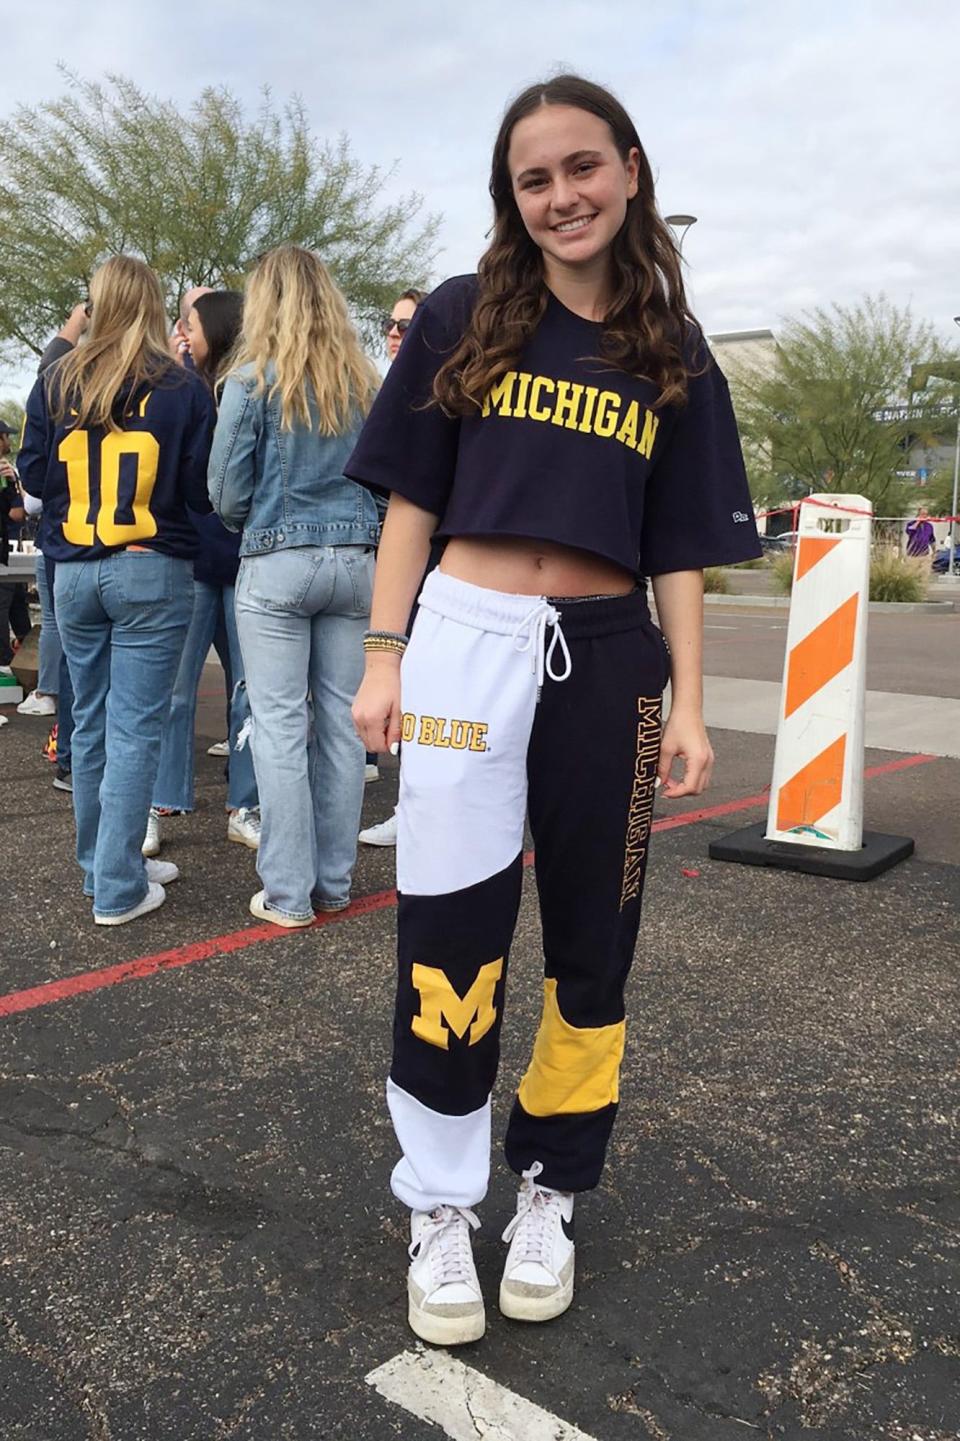 Lexie Morse, daughter of attorney Mike Morse, was the driving force behind their trip to Saturday's Fiesta Bowl. As her wardrobe suggests, she's a major Michigan fan and, she hopes, a future student.